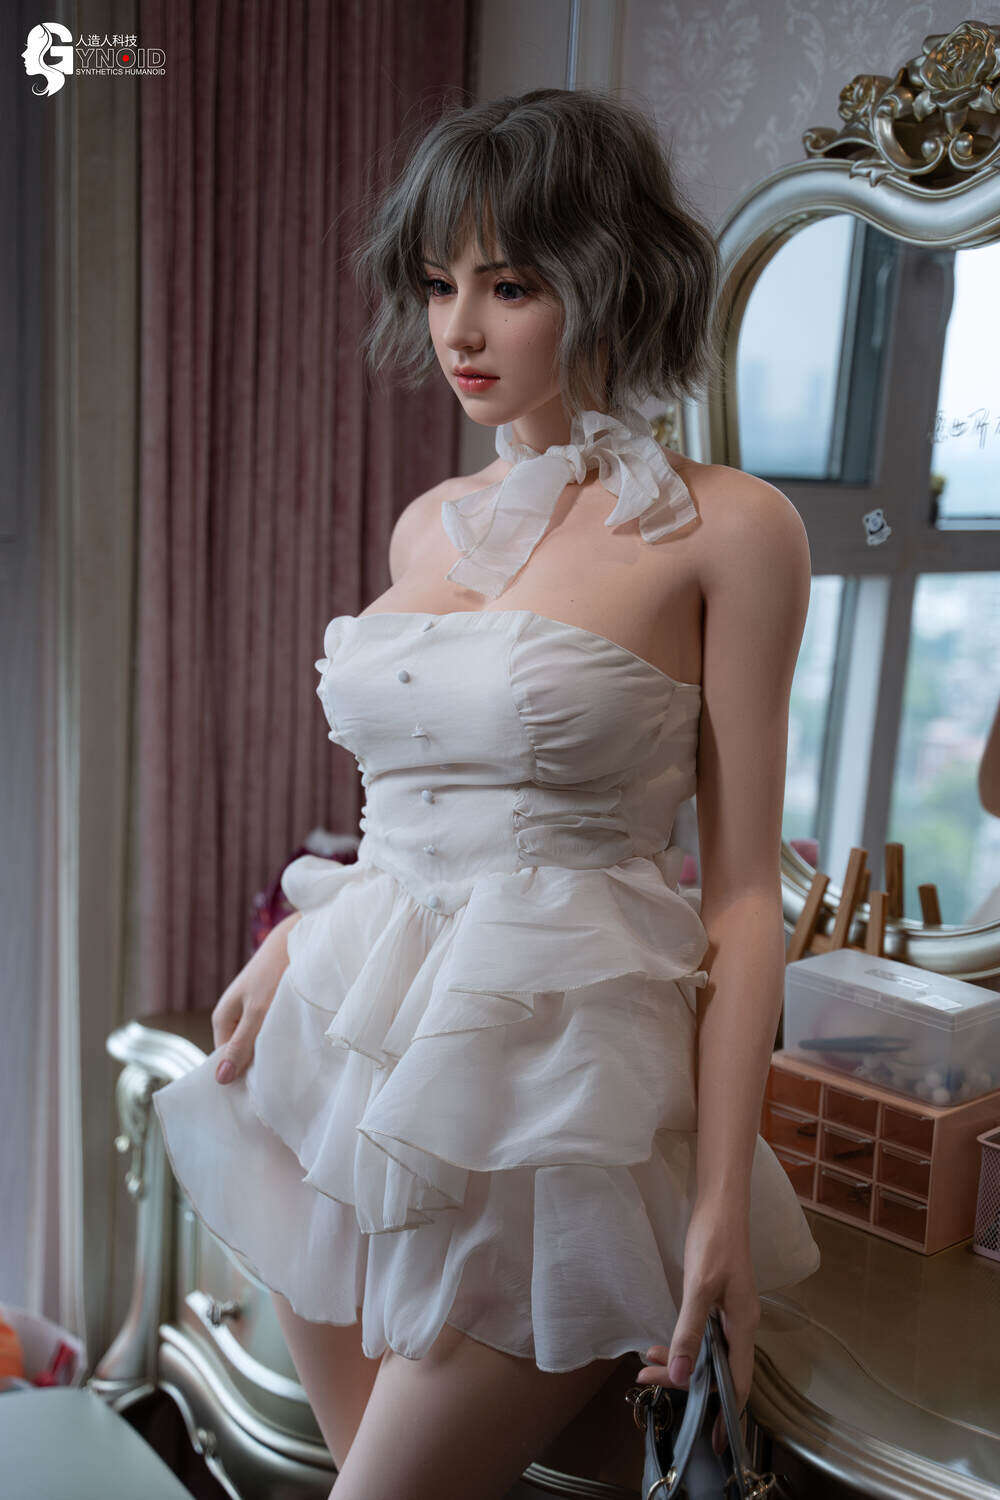 Mariana-163cm(5ft4) Gynoid Adult Doll E-Cup Normal Skin Tone Big Boobs Silicone Dolls image5